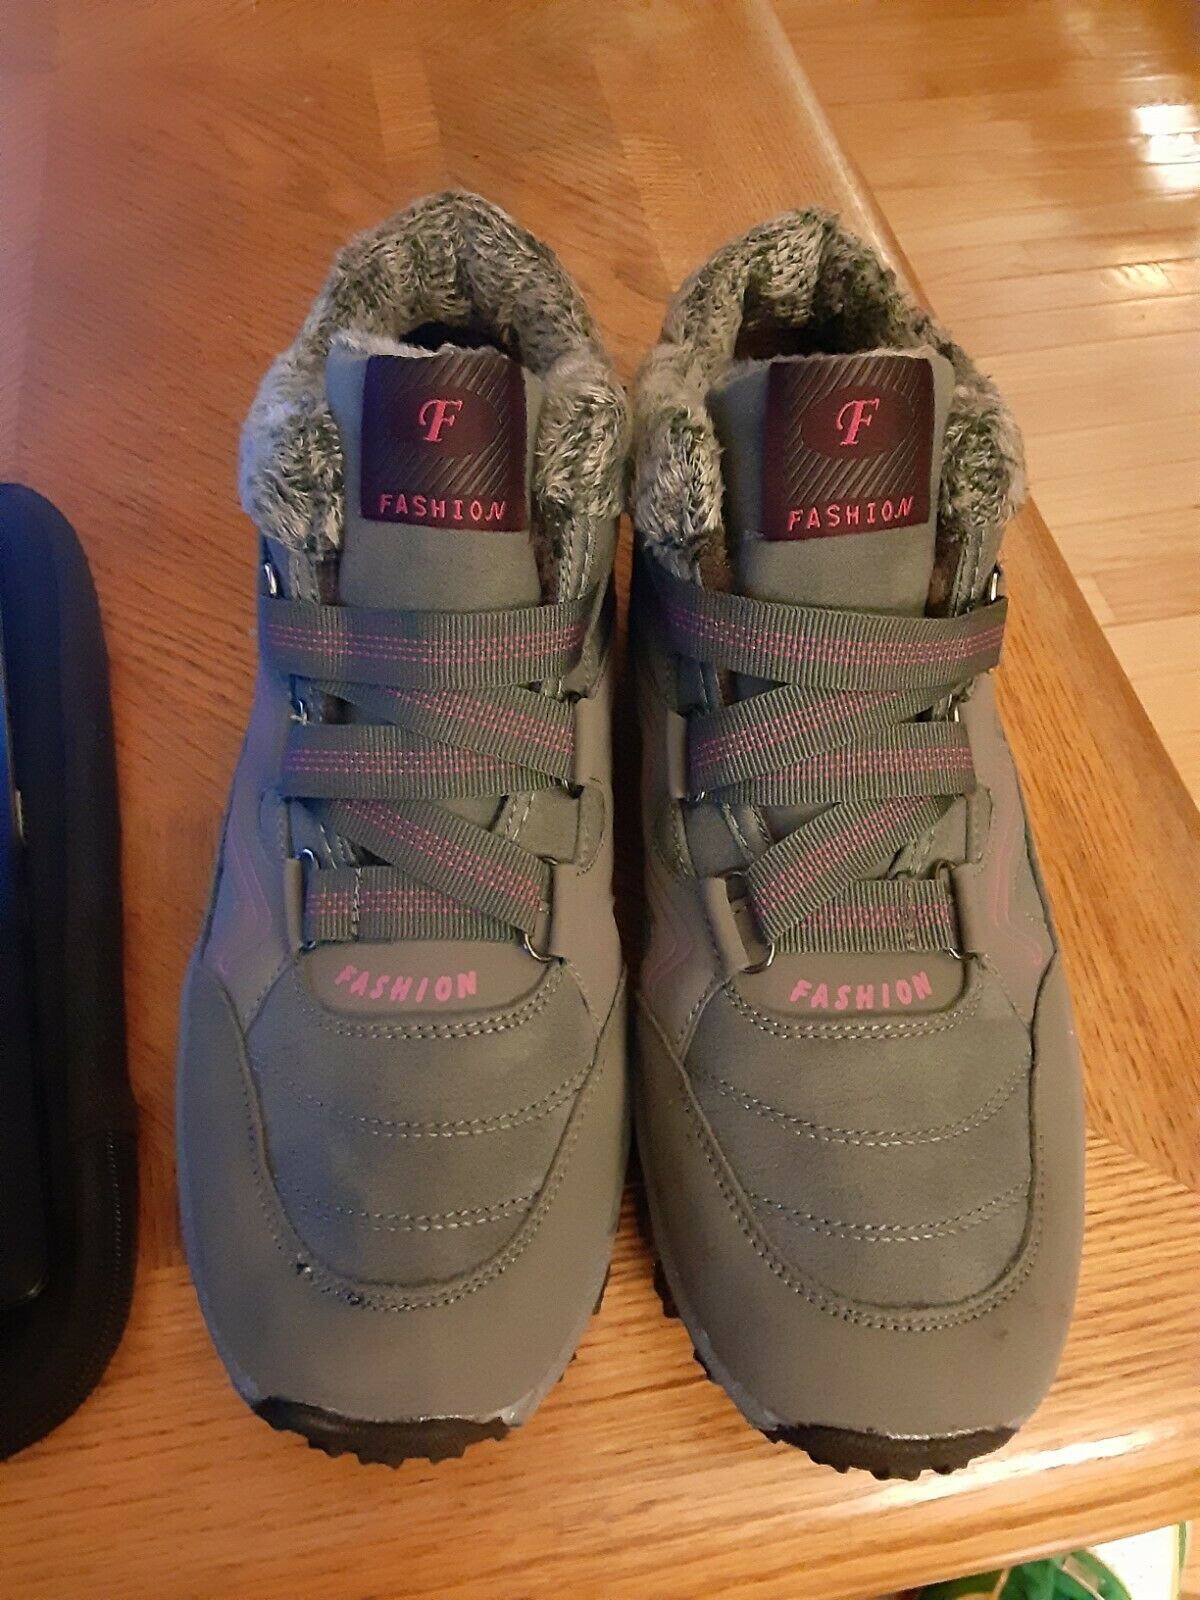 Fashion Women Hiking Shoes Gray and Pink Size 10